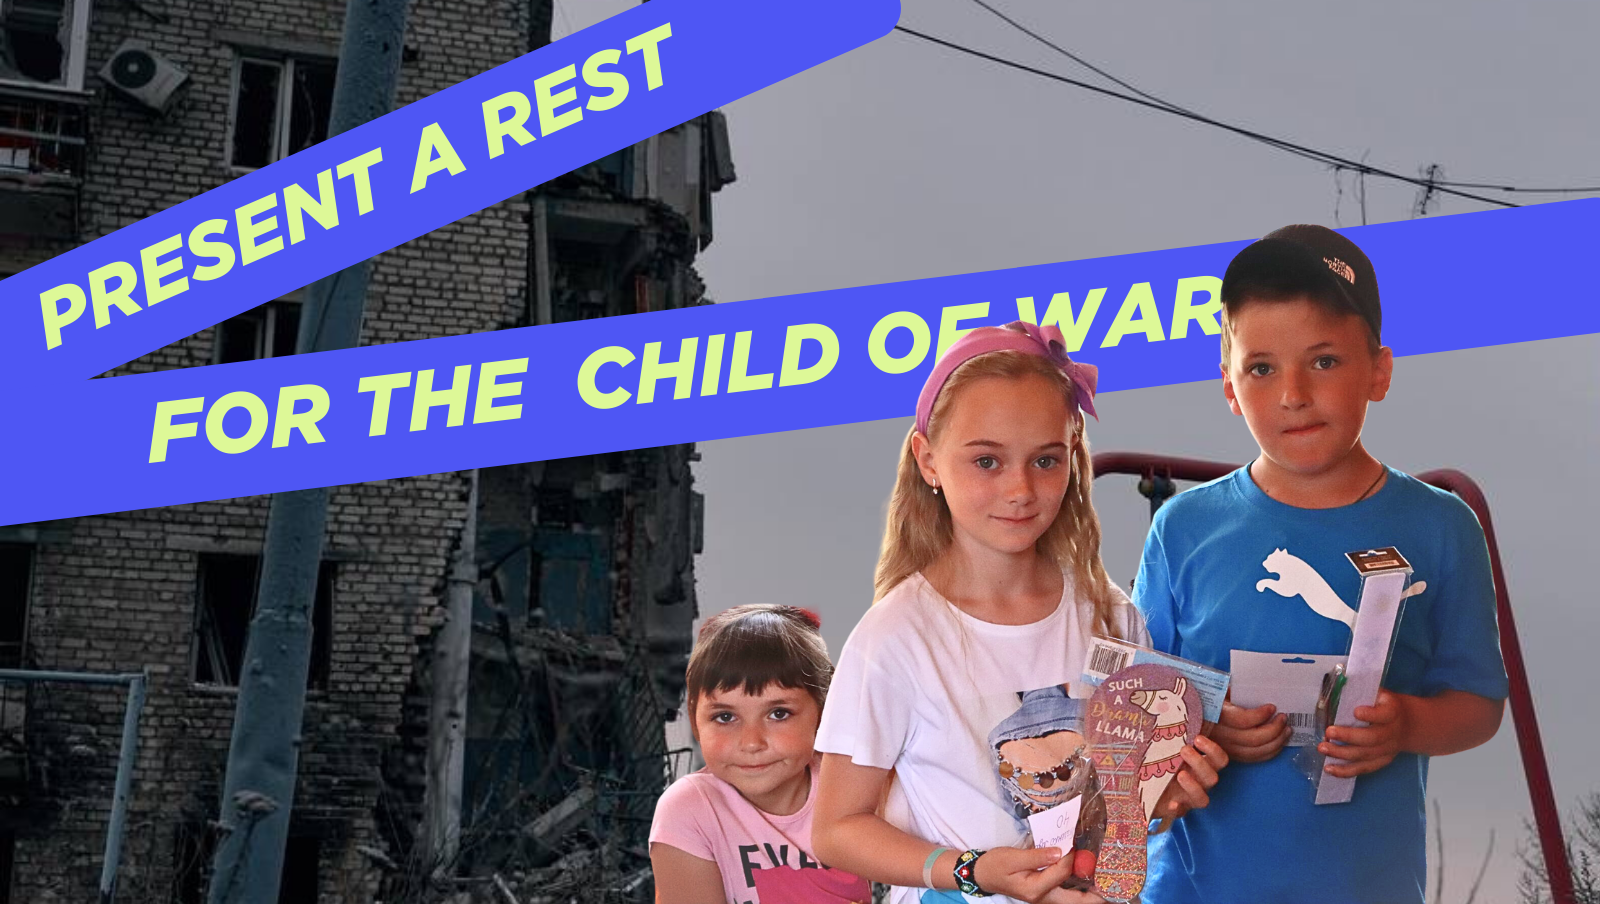 present-a-rest-for-the-child-of-war